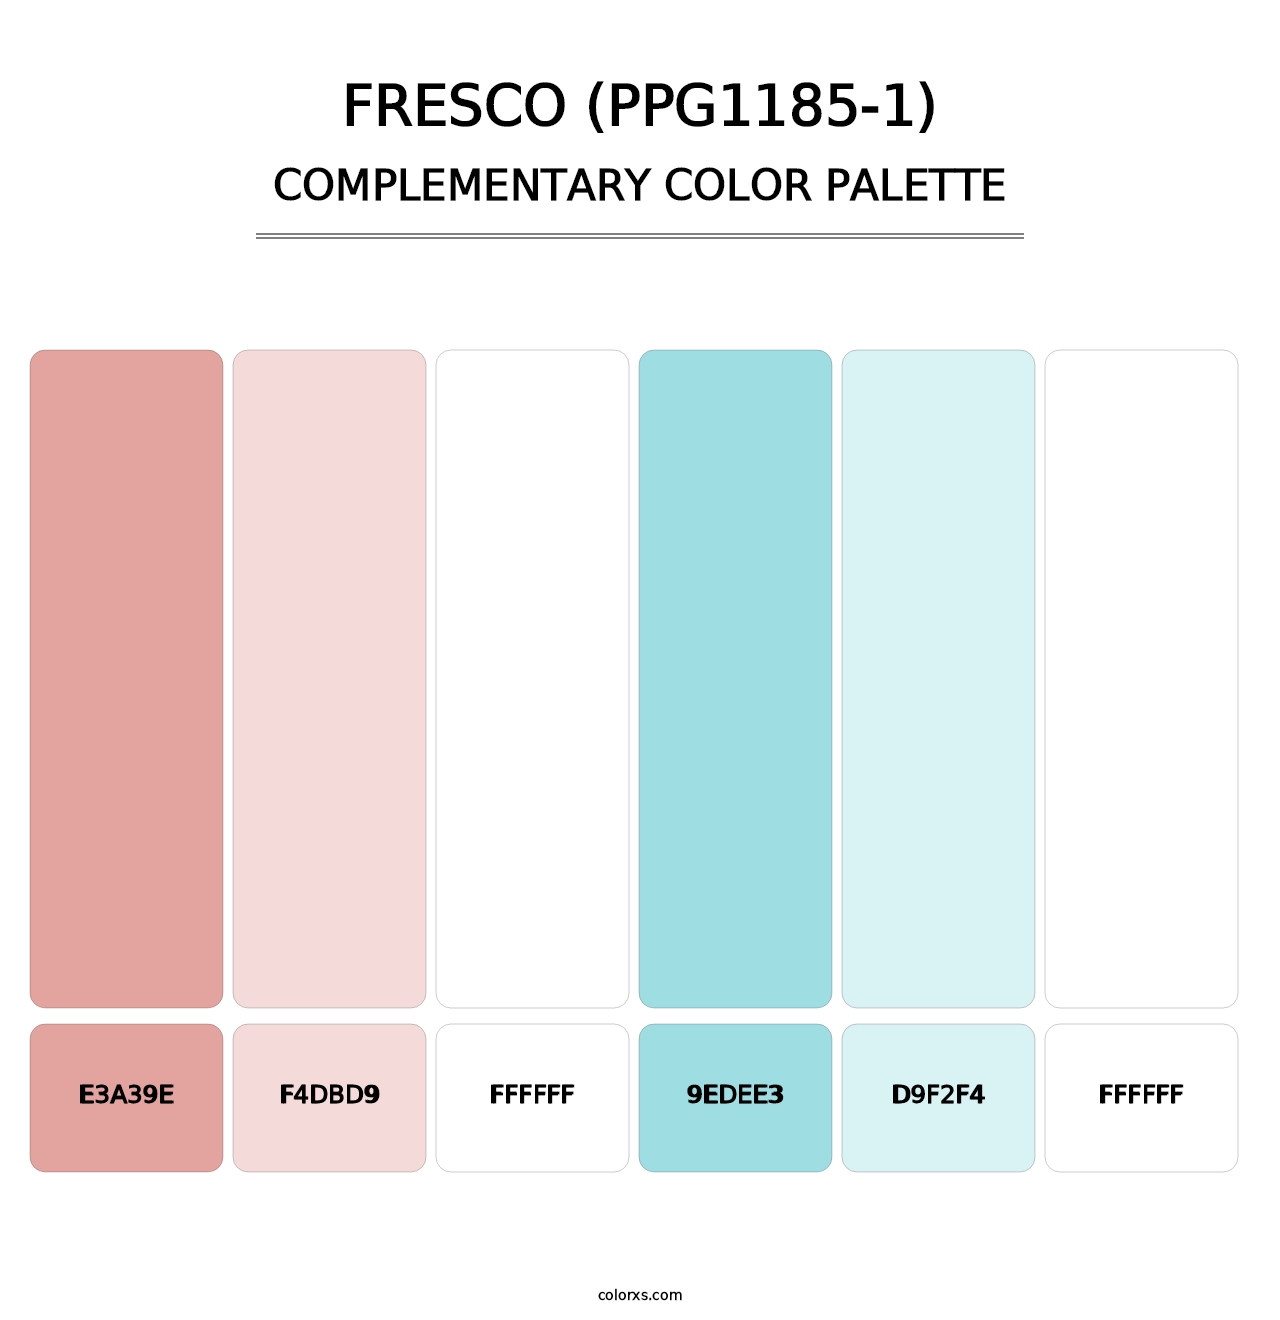 Fresco (PPG1185-1) - Complementary Color Palette